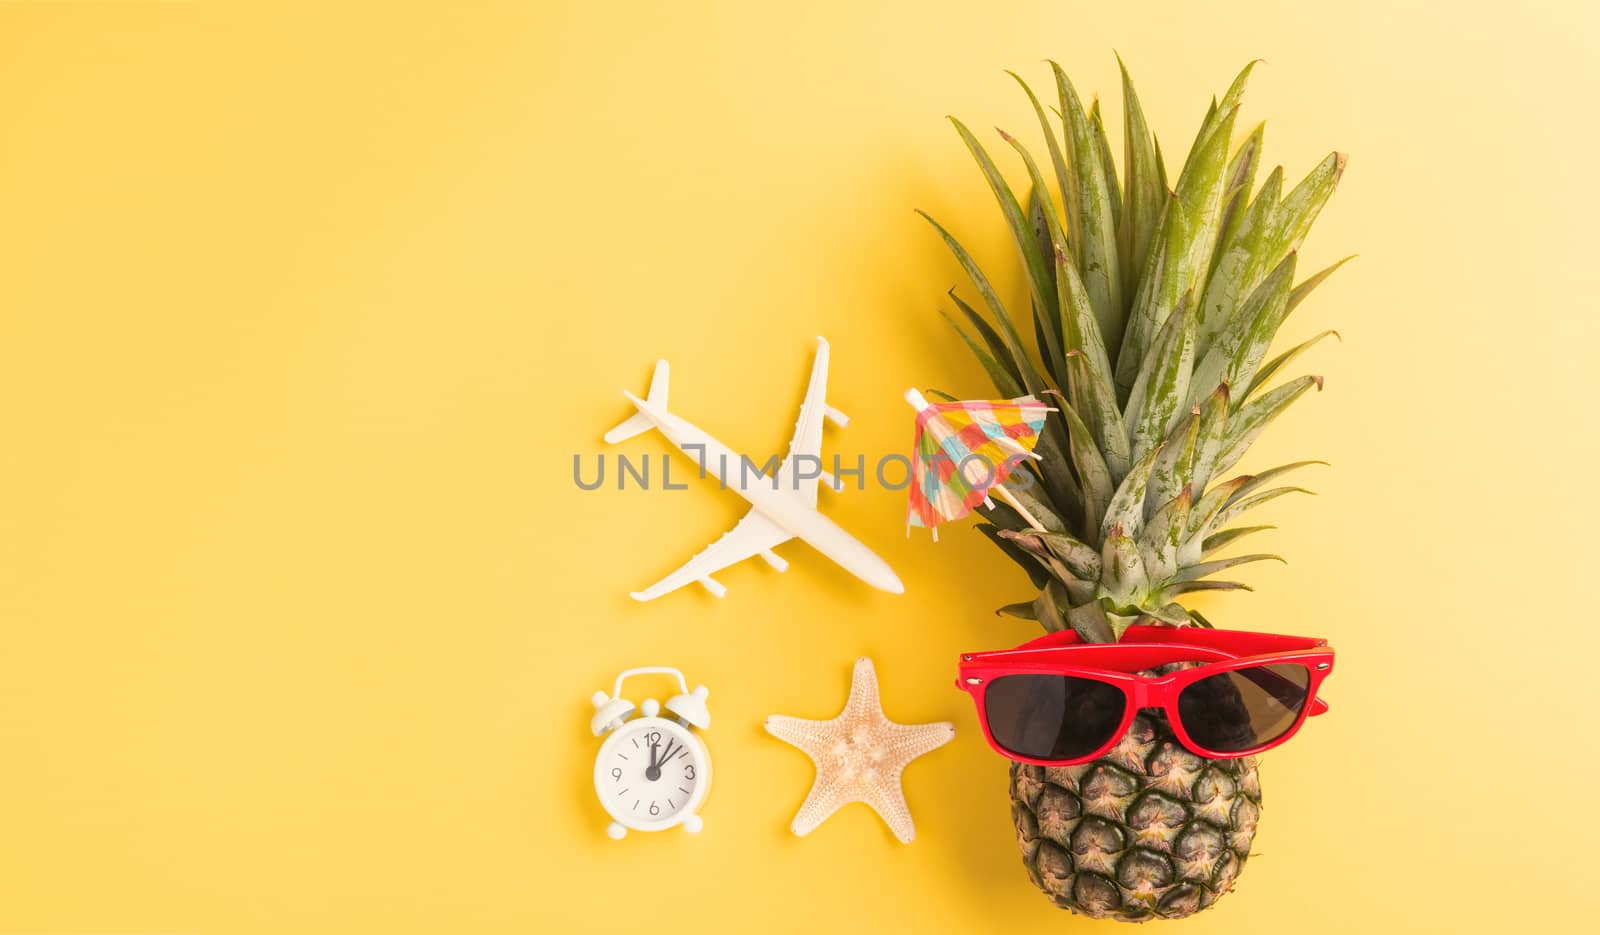 Celebrate Summer Pineapple Day Concept, Top view flat lay of funny fresh pineapple in sunglasses with model plane and starfish, in studio isolated on yellow background, Holiday summertime in tropical